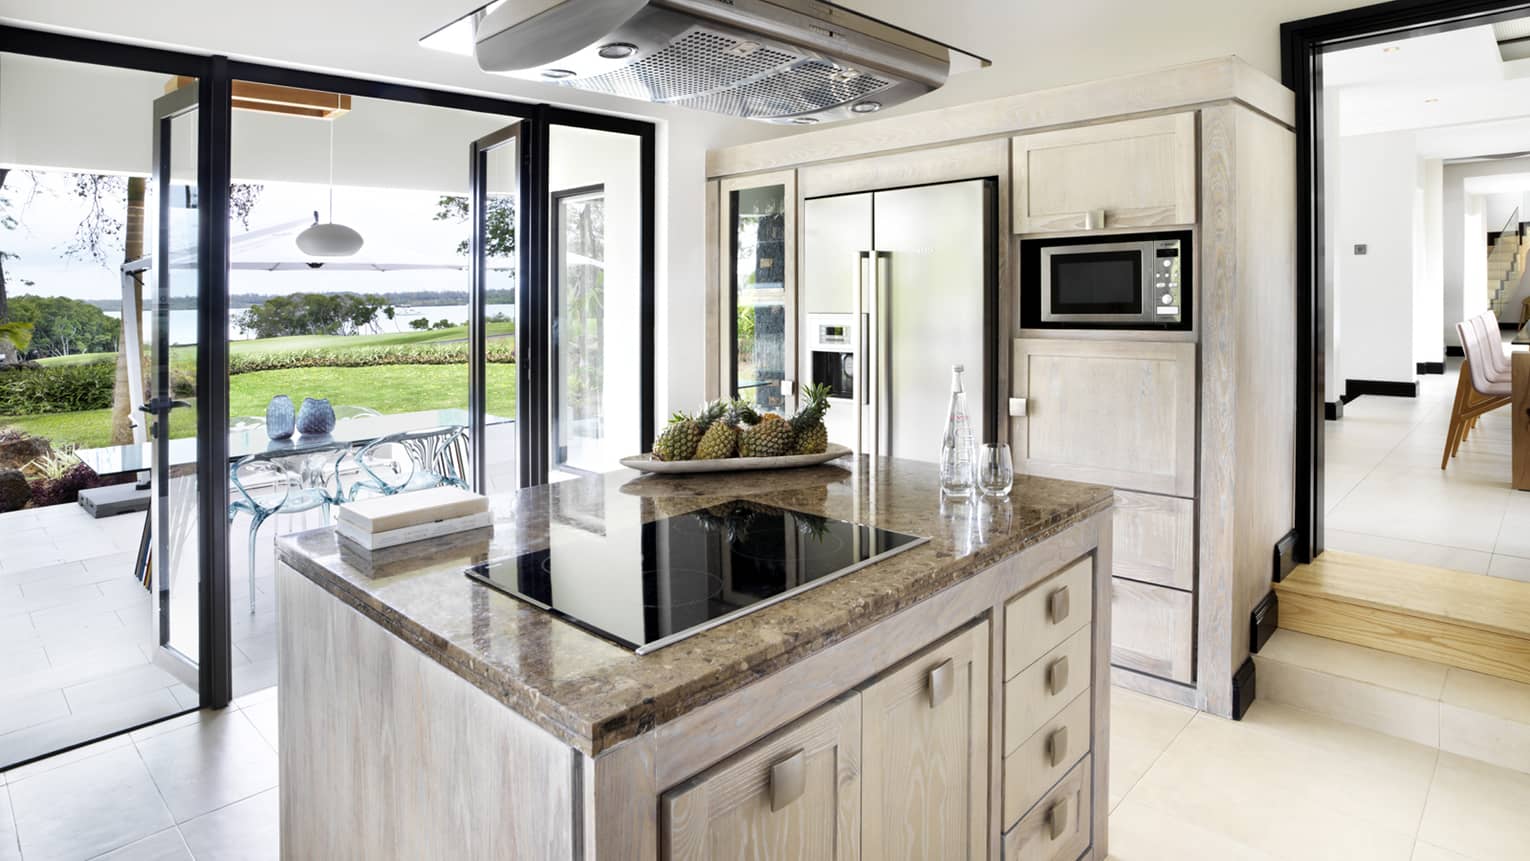 Stove range on marble island in bright, modern kitchen with open glass walls